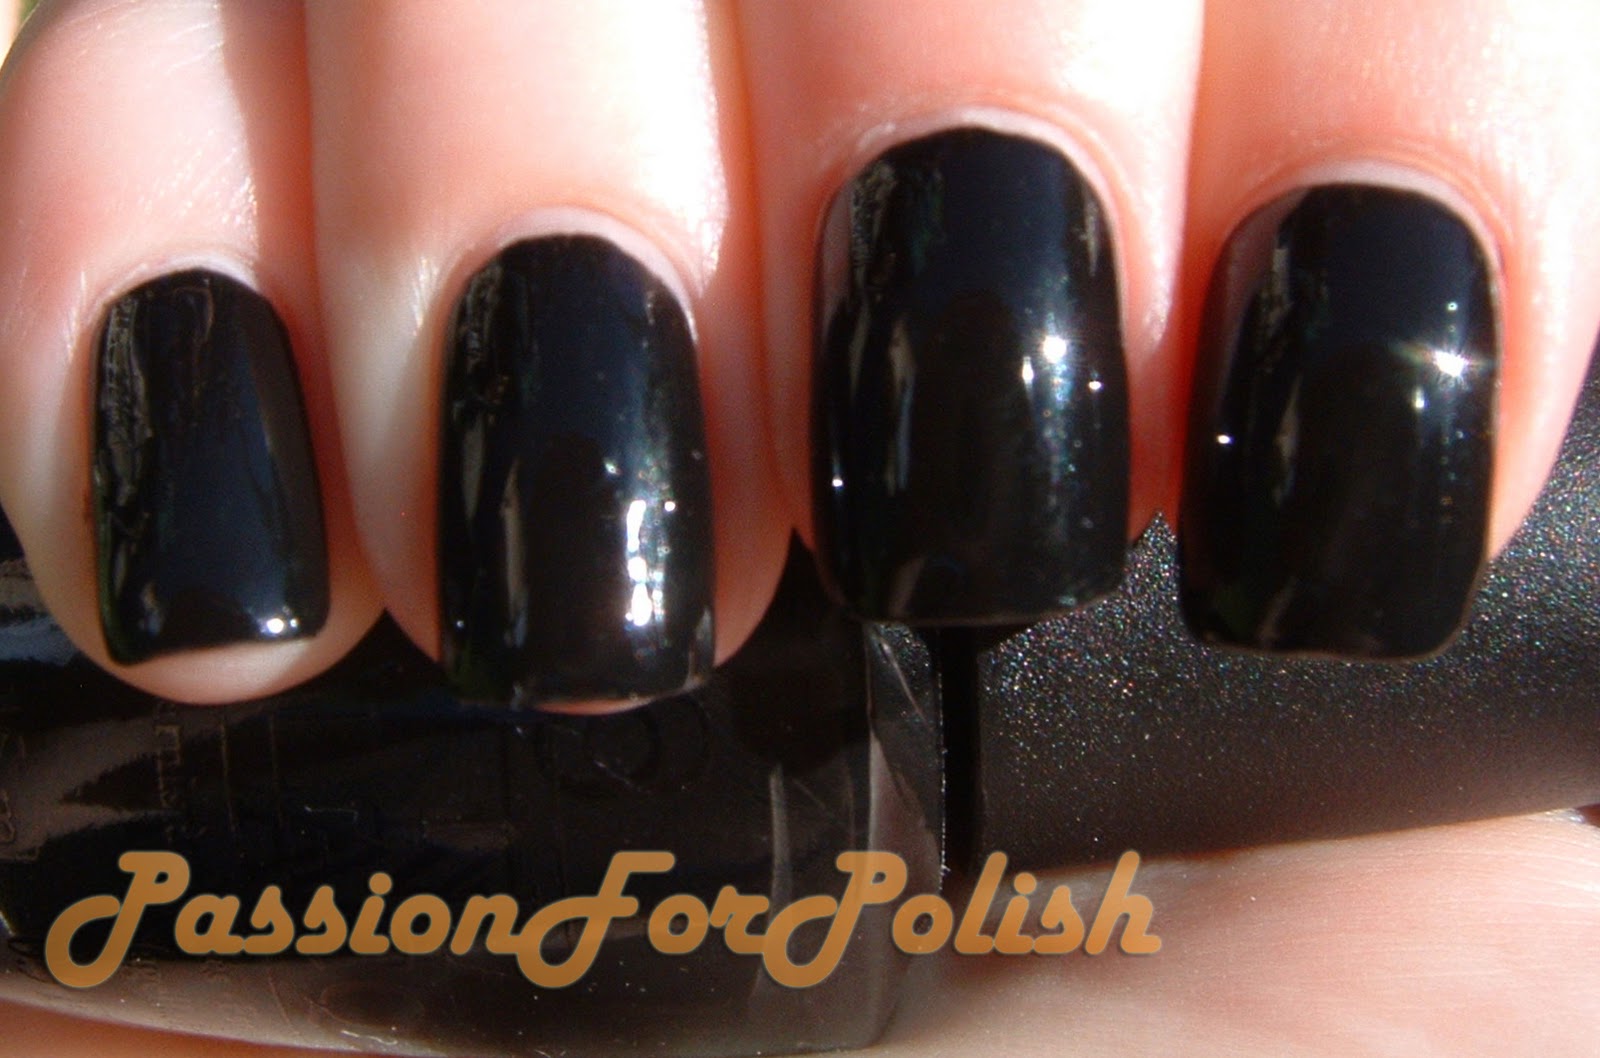 2. OPI Nail Lacquer in Black Onyx - wide 5